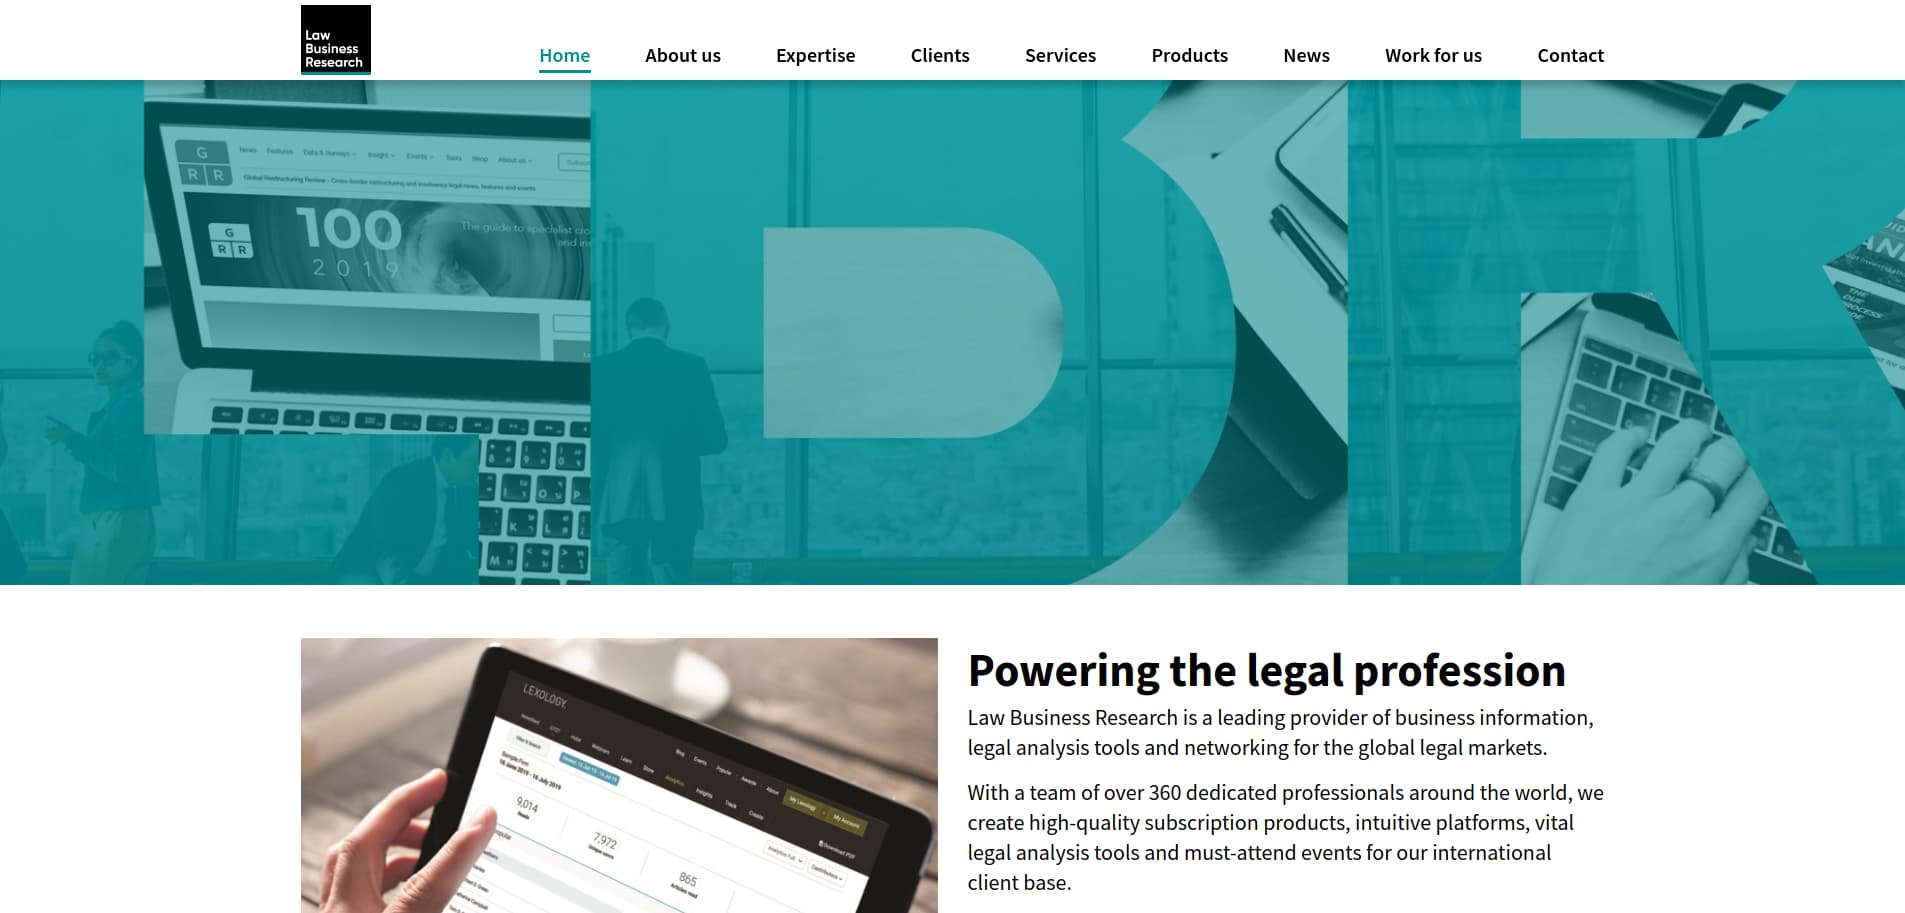 Law Business Research website